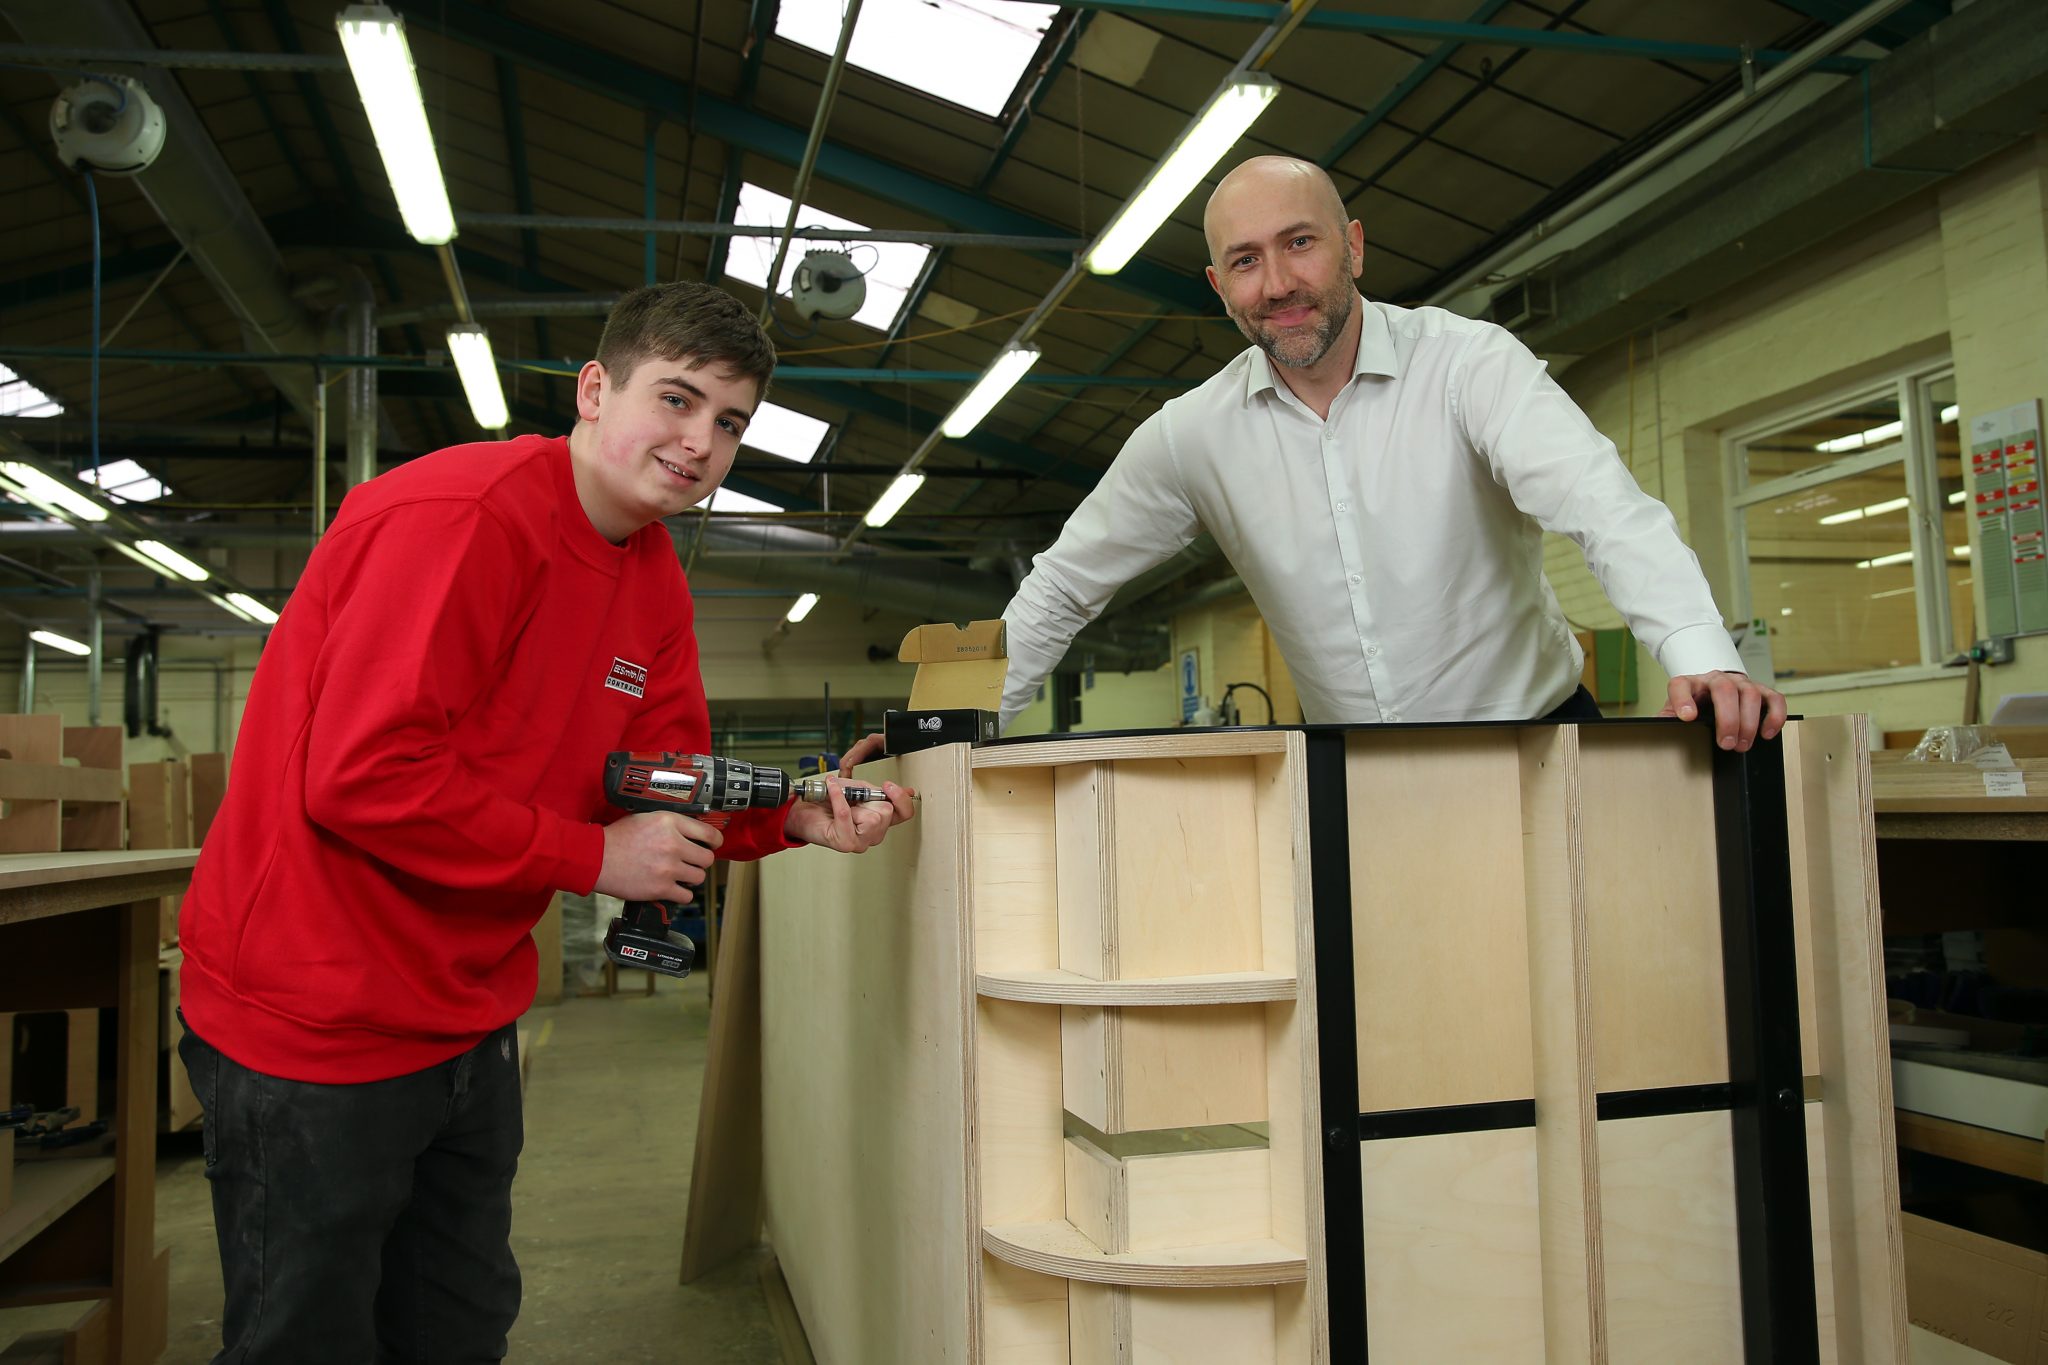 LEADING LEICESTER SPECIALIST INTERIORS AND JOINERY CONTRACTOR CELEBRATES 90 YEARS OF APPRENTICESHIPS @EESmithUK